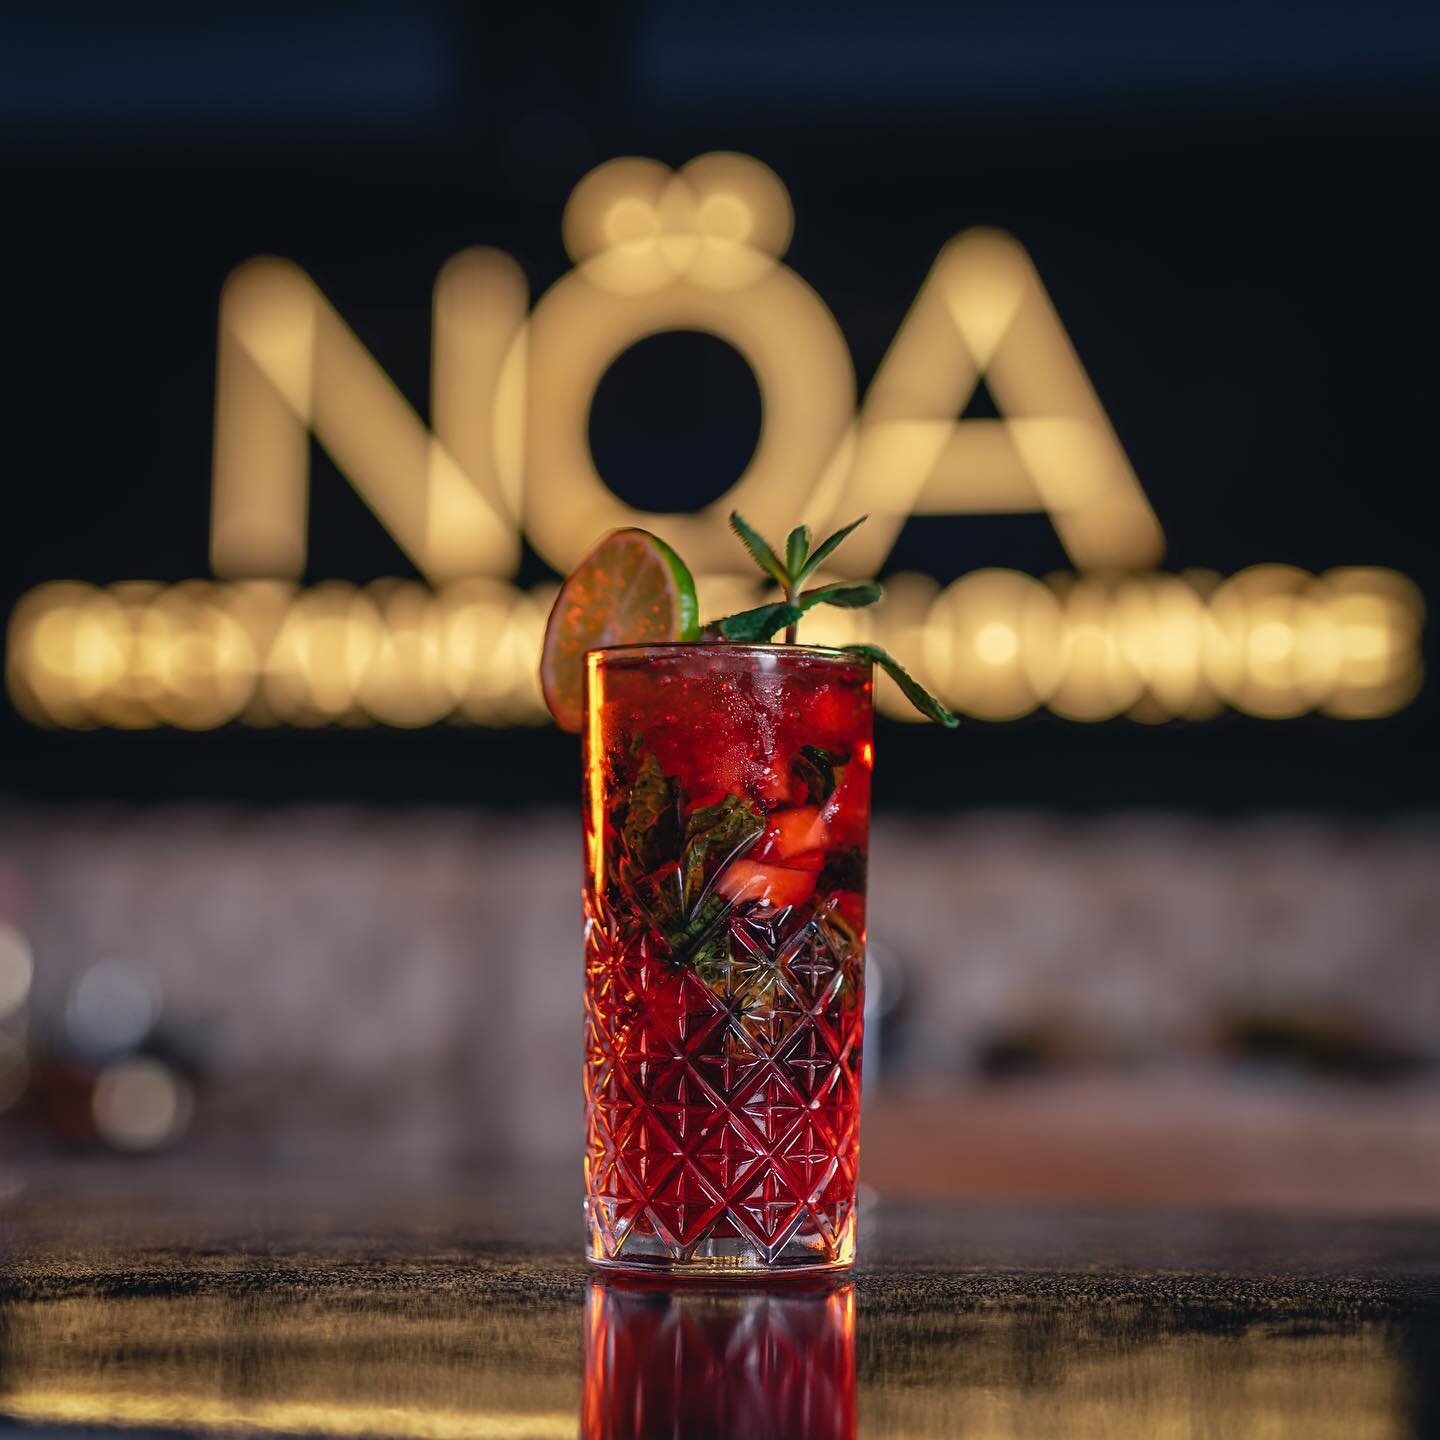 Midweek vibes at N&Ouml;A - Chilled &amp; laid back. Try our new mocktail menu, a house favourite: Strawberry Mojito 🍓 

Book your table at N&Ouml;A ❤️
Visit www.noalounge.com to reserve your table. On the day bookings, please call 01923 545047. Pho